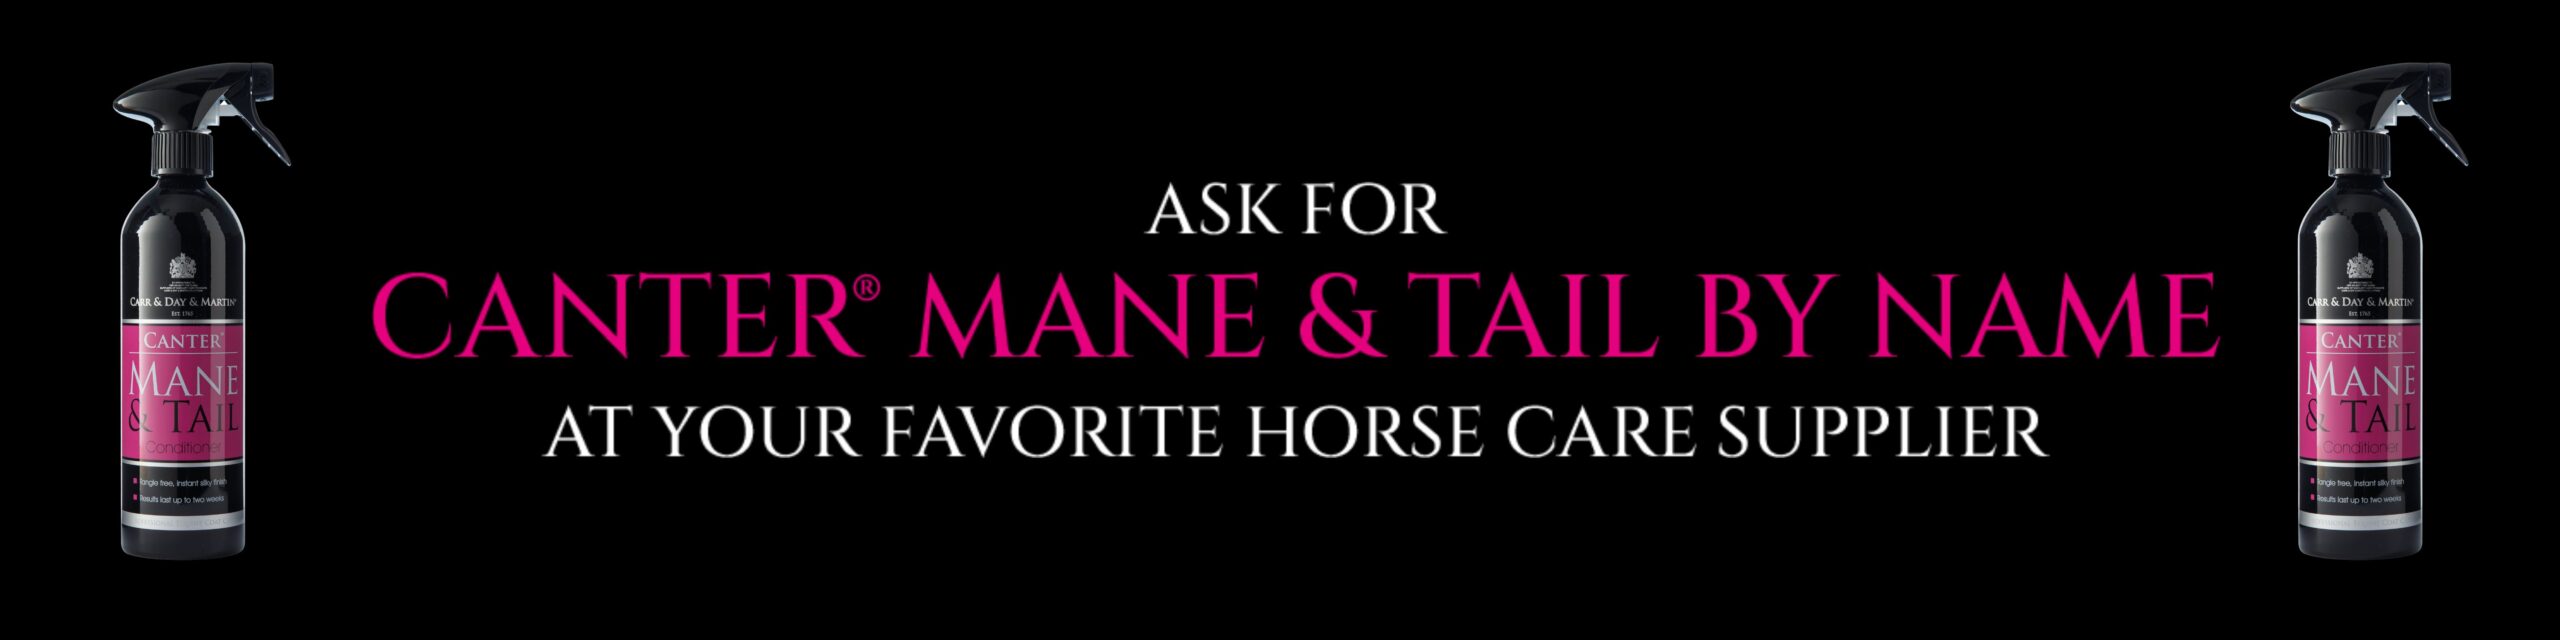 Canter Mane & Tail